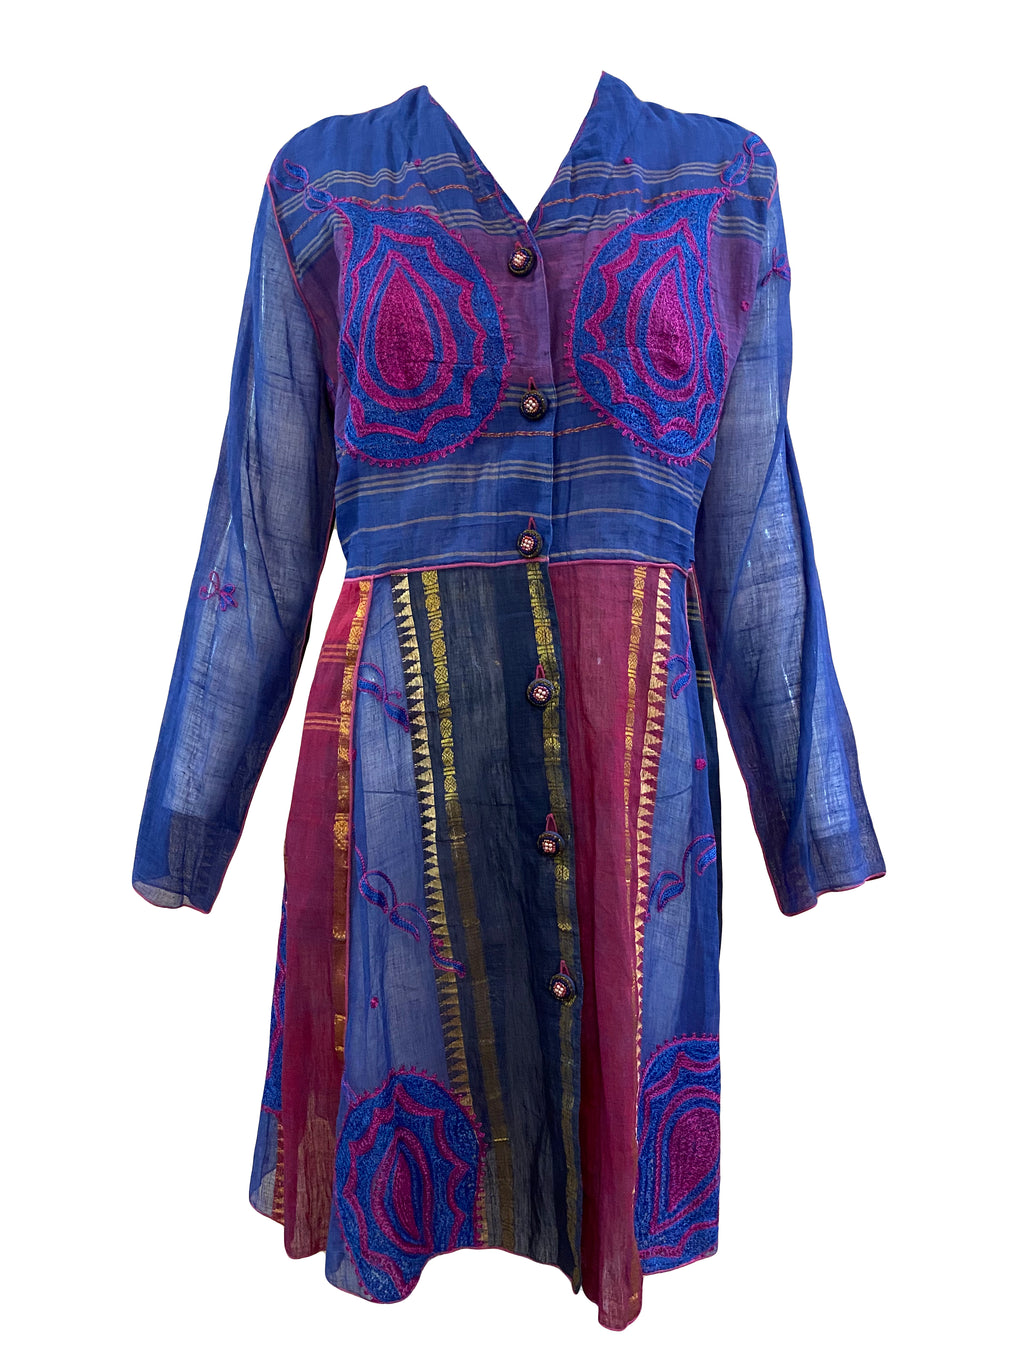 Paul Ropp Purple and Blue Paisley Summer Dress FRONT 1 of 4